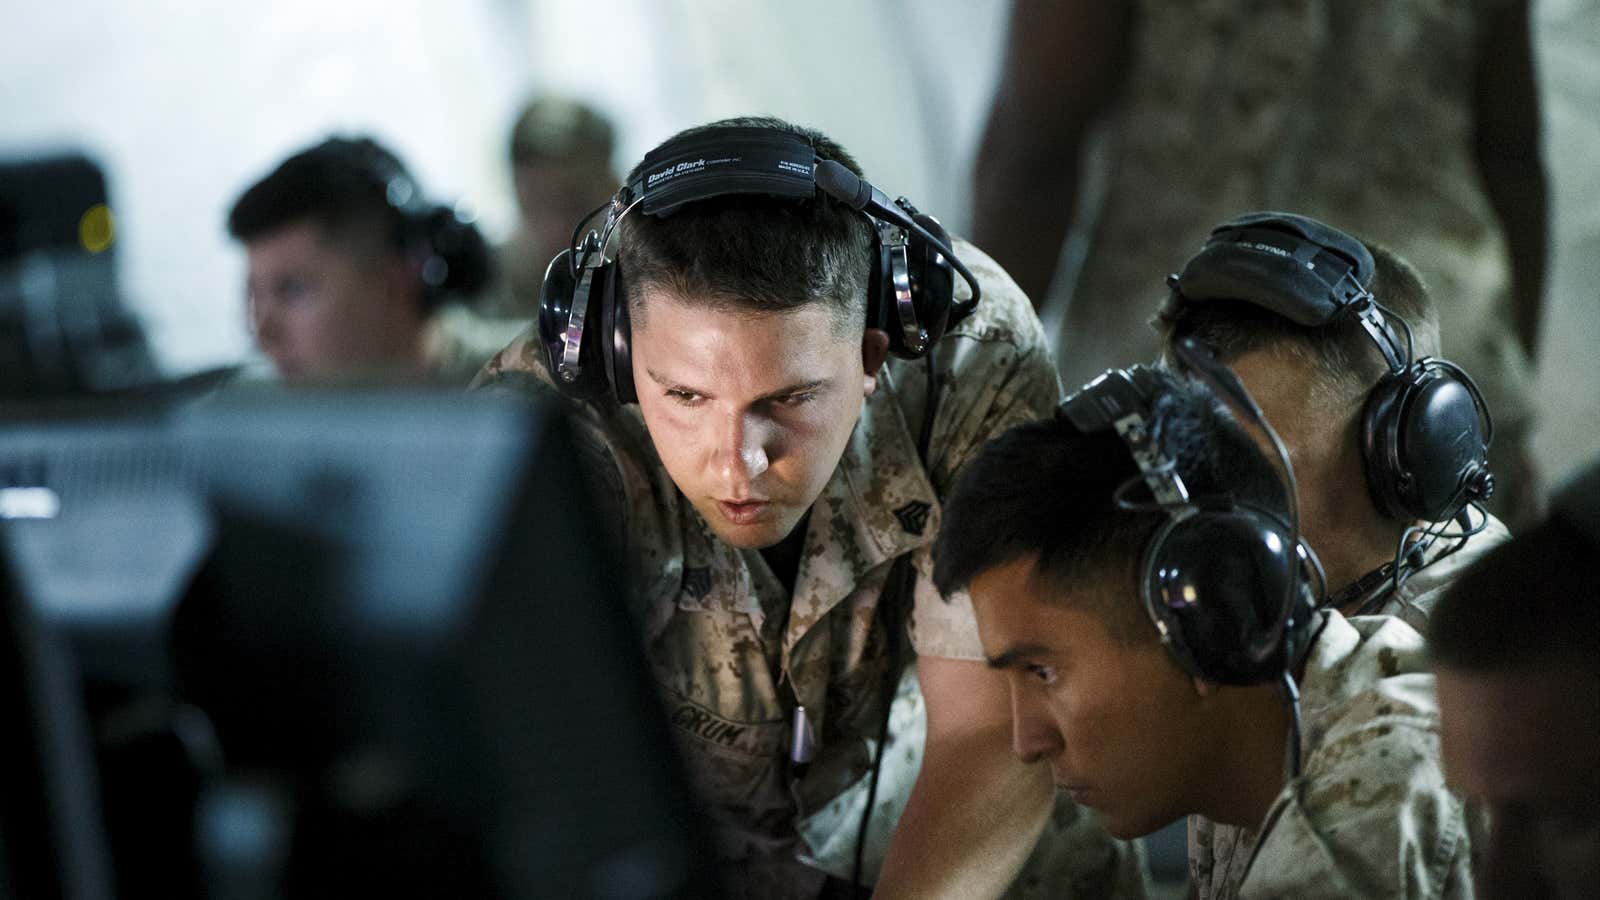 Marines from the USMC Marine Air Control Squadron 1 monitors and relays information from the AN/TPS-59 air search radar system in the Tactical Air Operations Center (TAOC) during “Black Dart”, a live-fly, live fire demonstration of 55 unmanned aerial vehicles, or drones, at Naval Base Ventura County Sea Range, Point Mugu, near Oxnard, California July 31, 2015. REUTERS/Patrick T. Fallon – GF20000010515